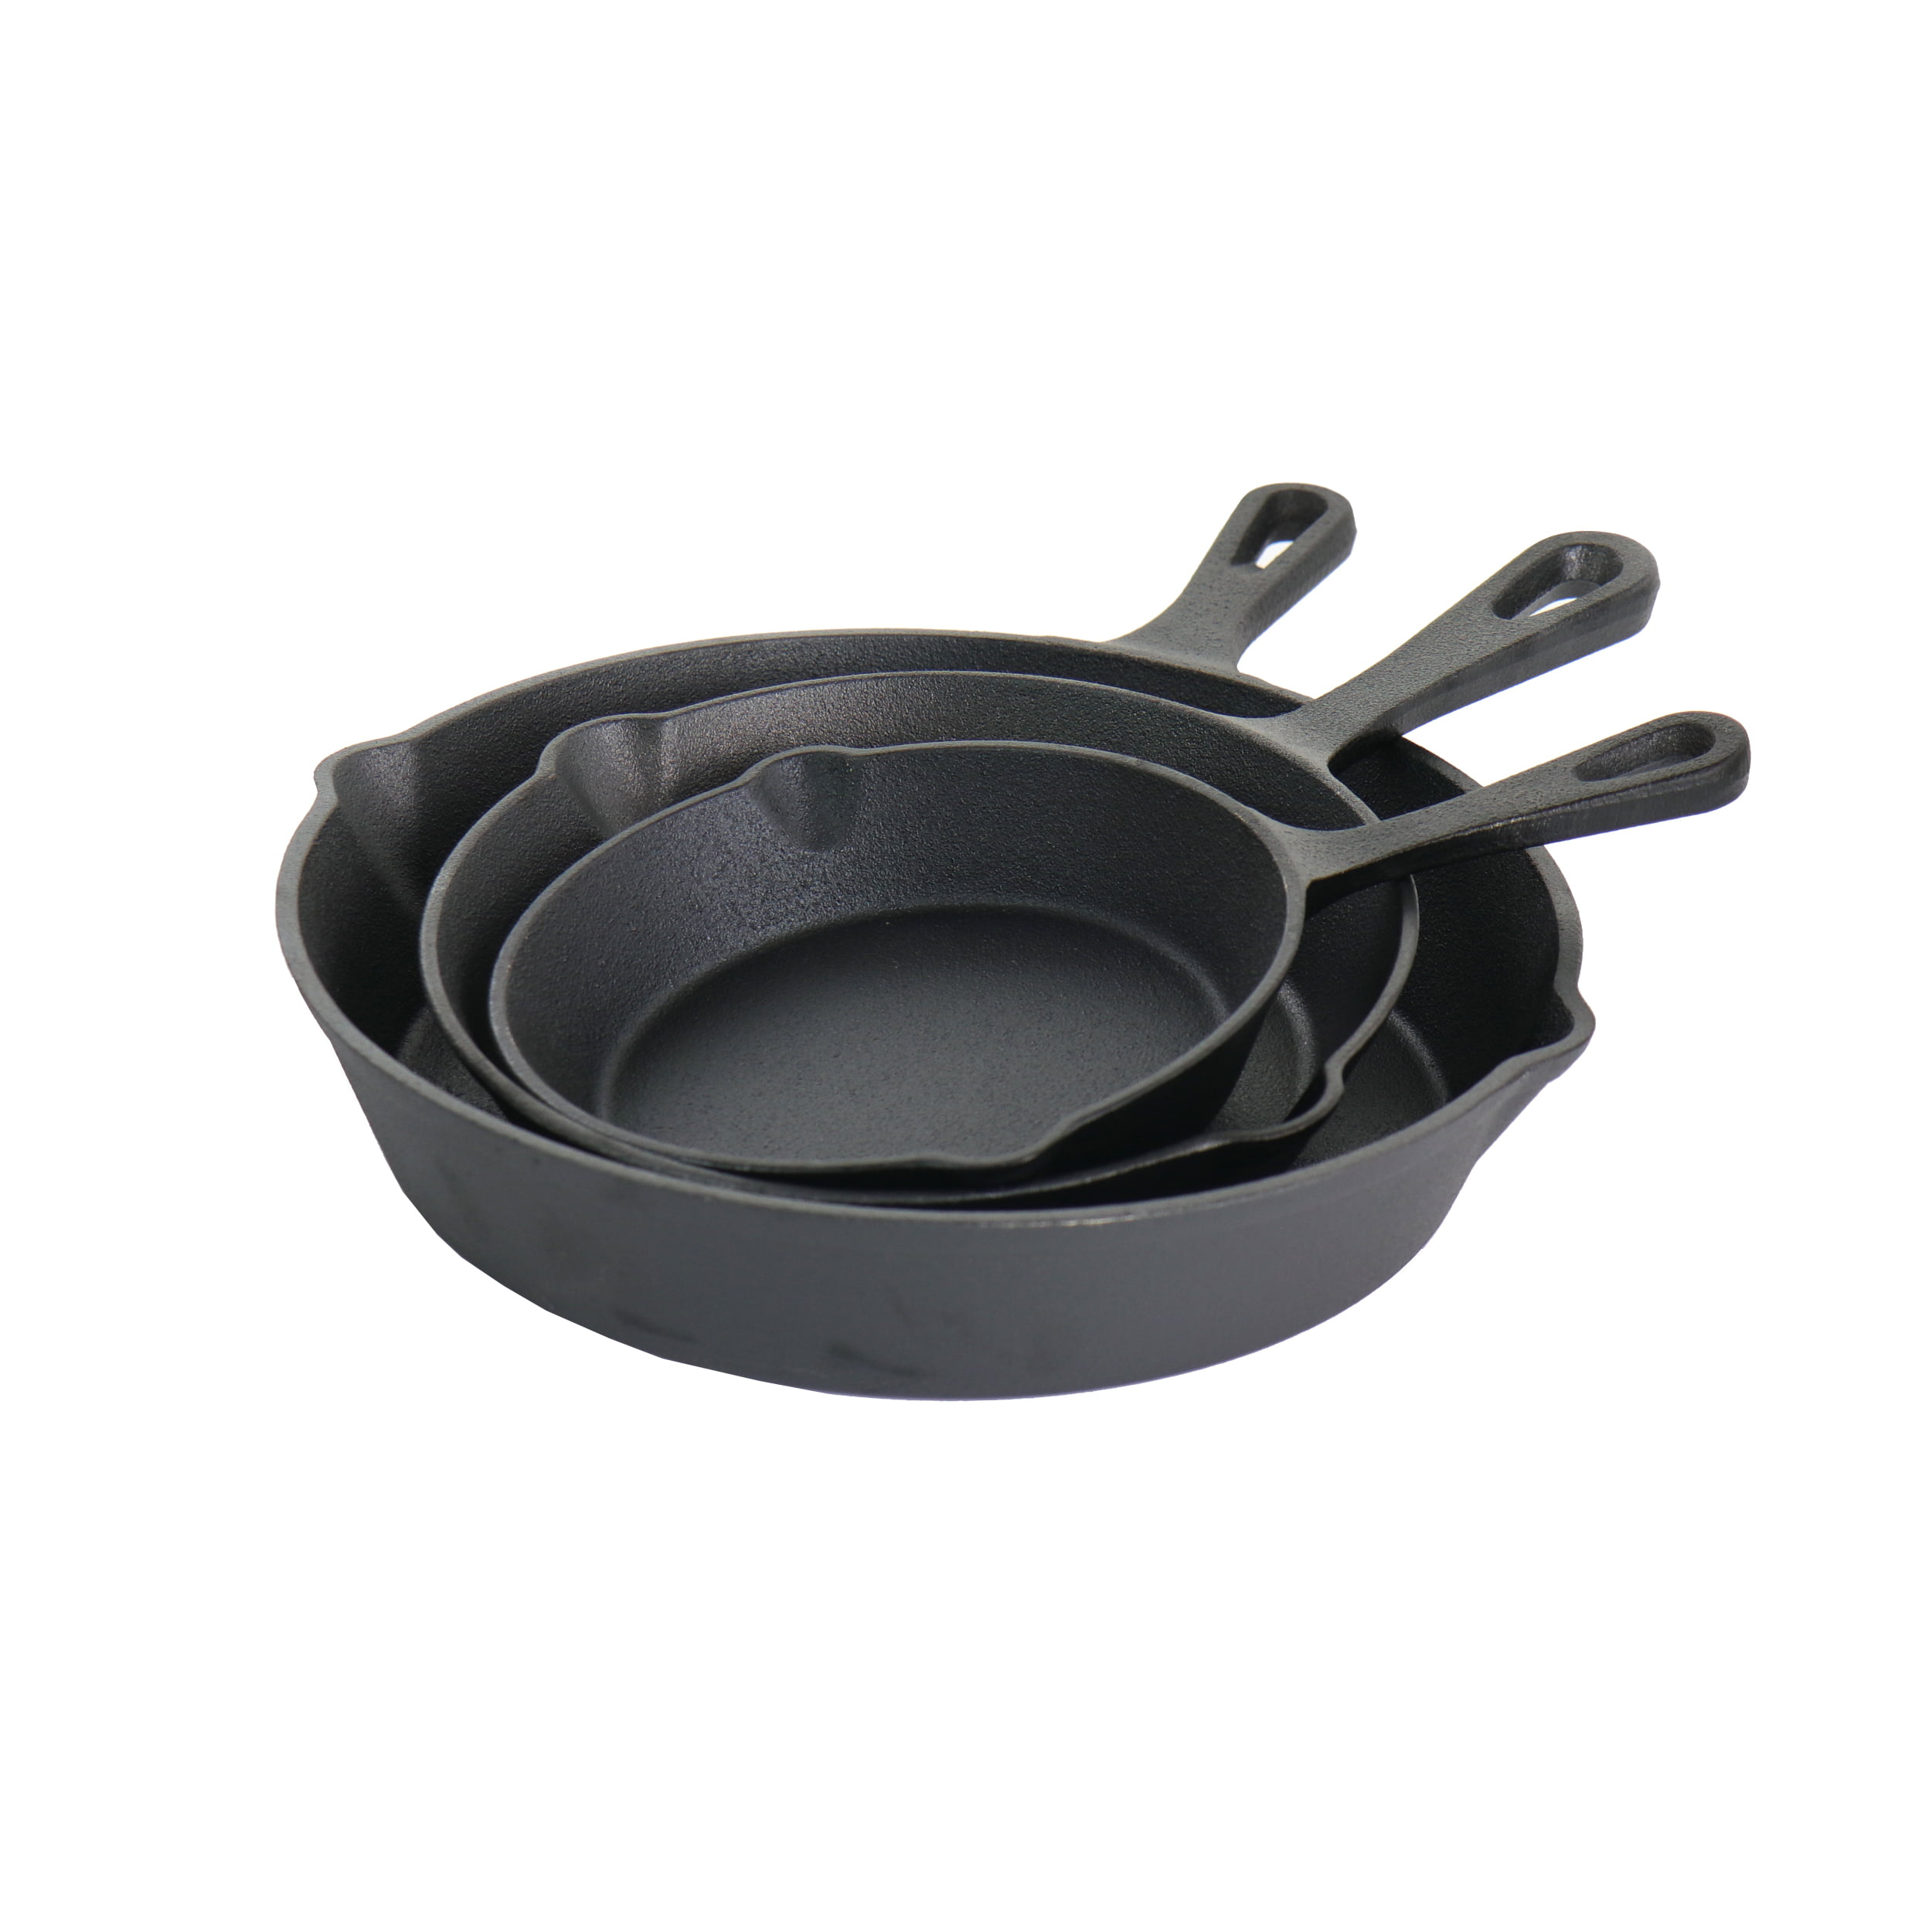 MegaChef Pre-Seasoned 4 Piece Cast Iron Set with Silicone Handles - On Sale  - Bed Bath & Beyond - 32020773